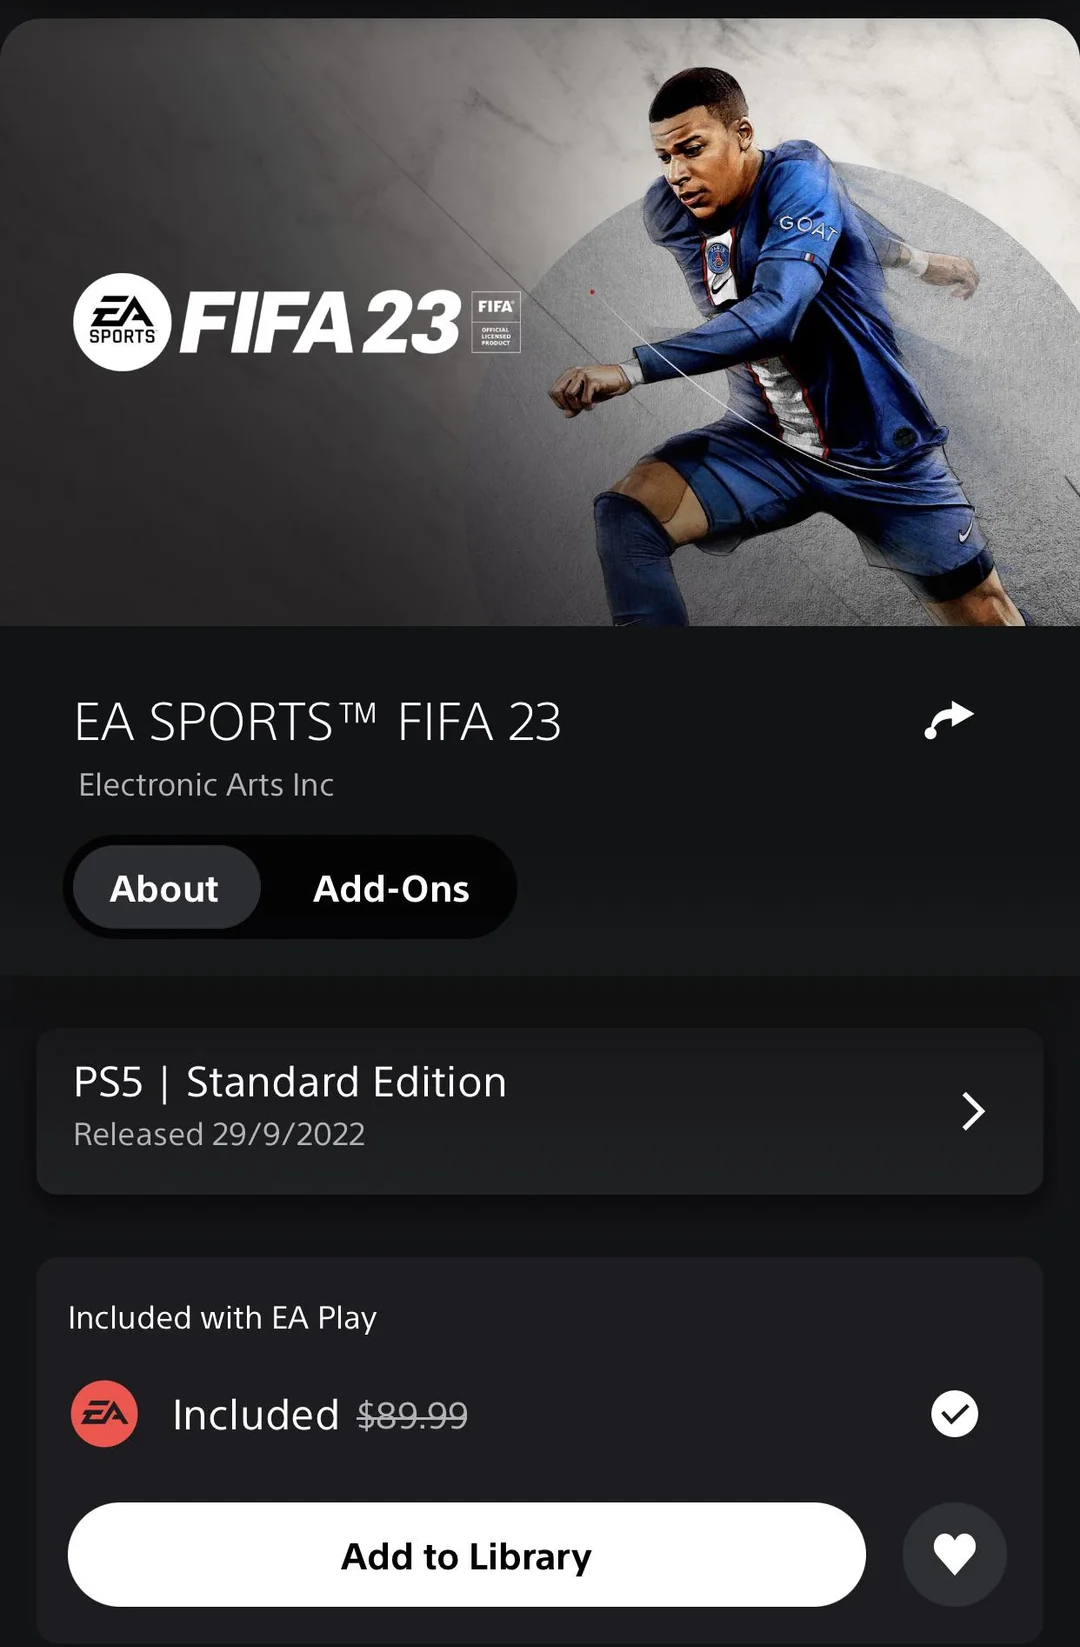 FIFA 23 On Xbox Game Pass: How To Get Access